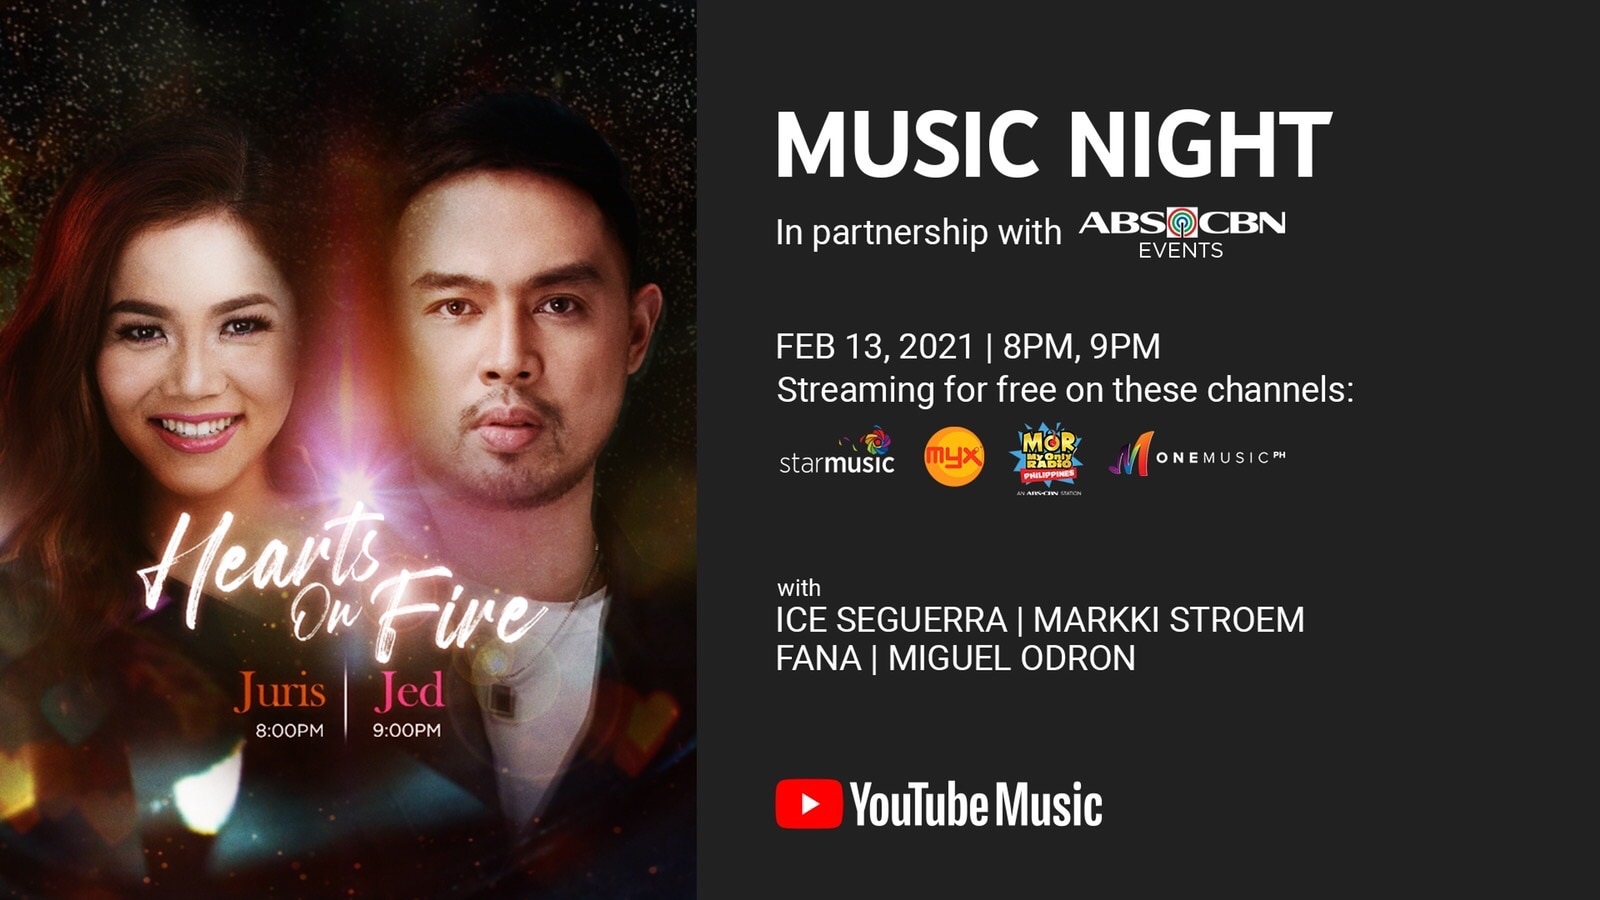 YouTube Music Night _ Hearts on Fire _ Juris and Jed